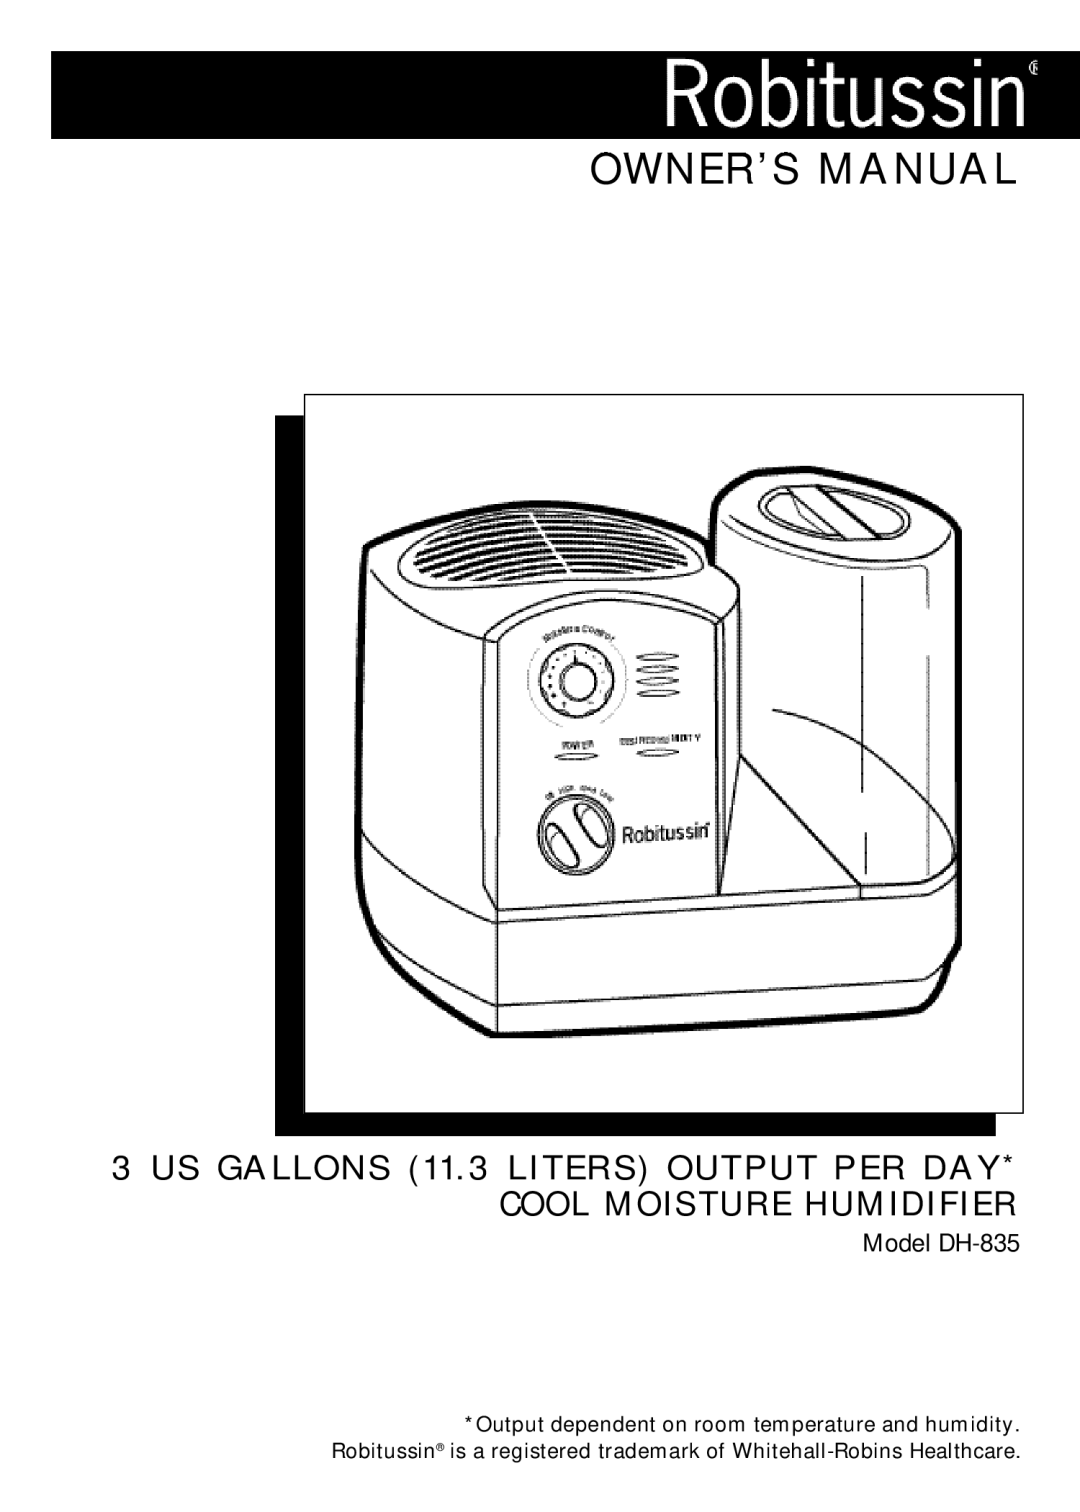 Honeywell DH-835 owner manual US GALLONS 11.3 LITERS OUTPUT PER DAY, Cool Moisture Humidifier 